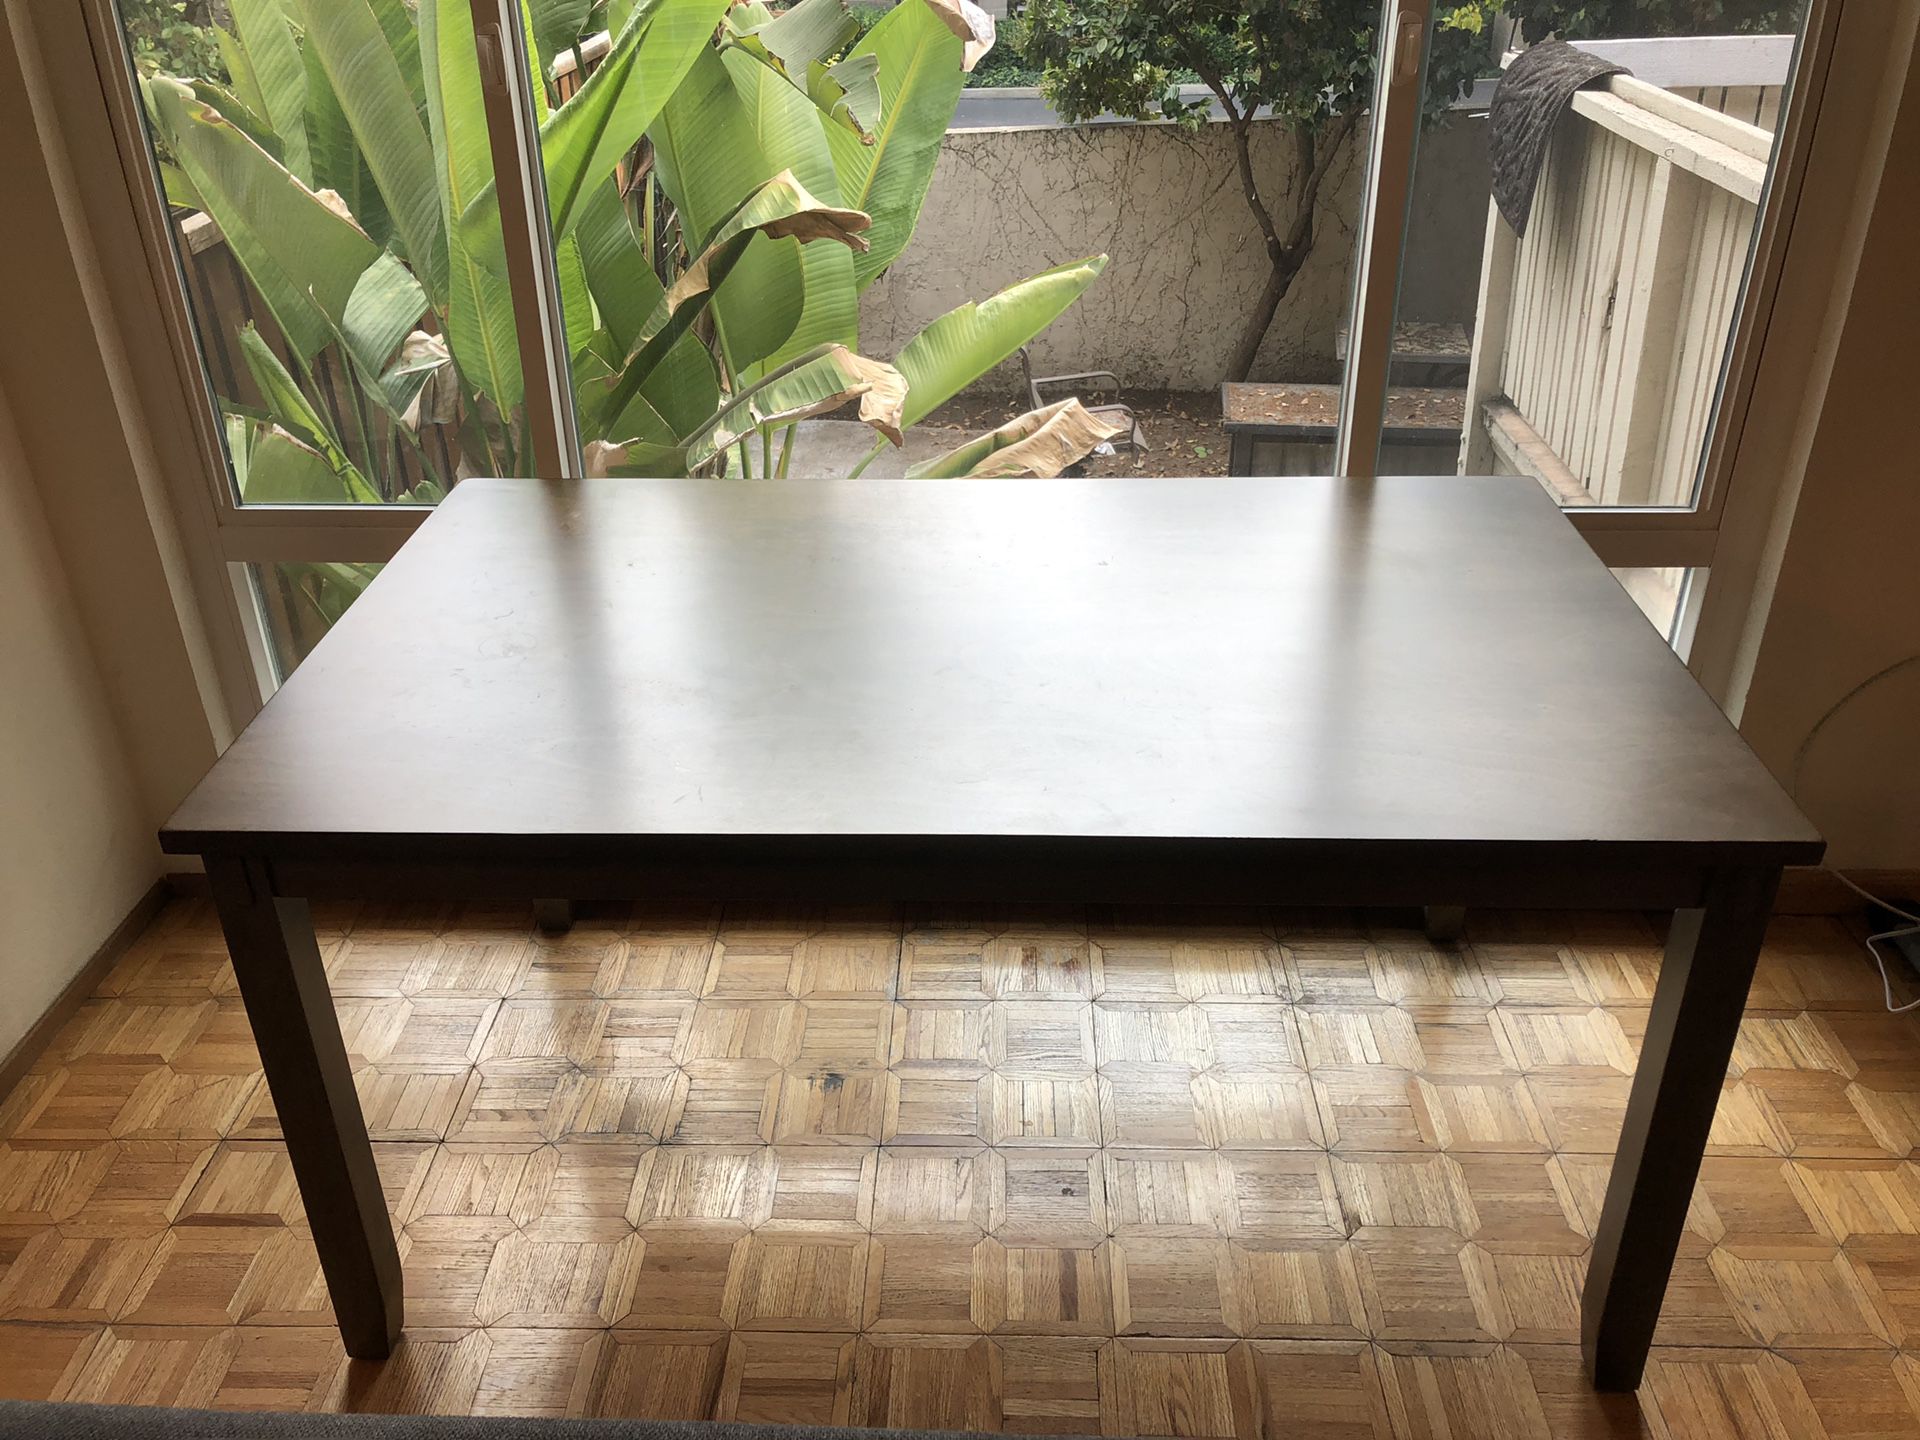 6-seat kitchen table - brand new!